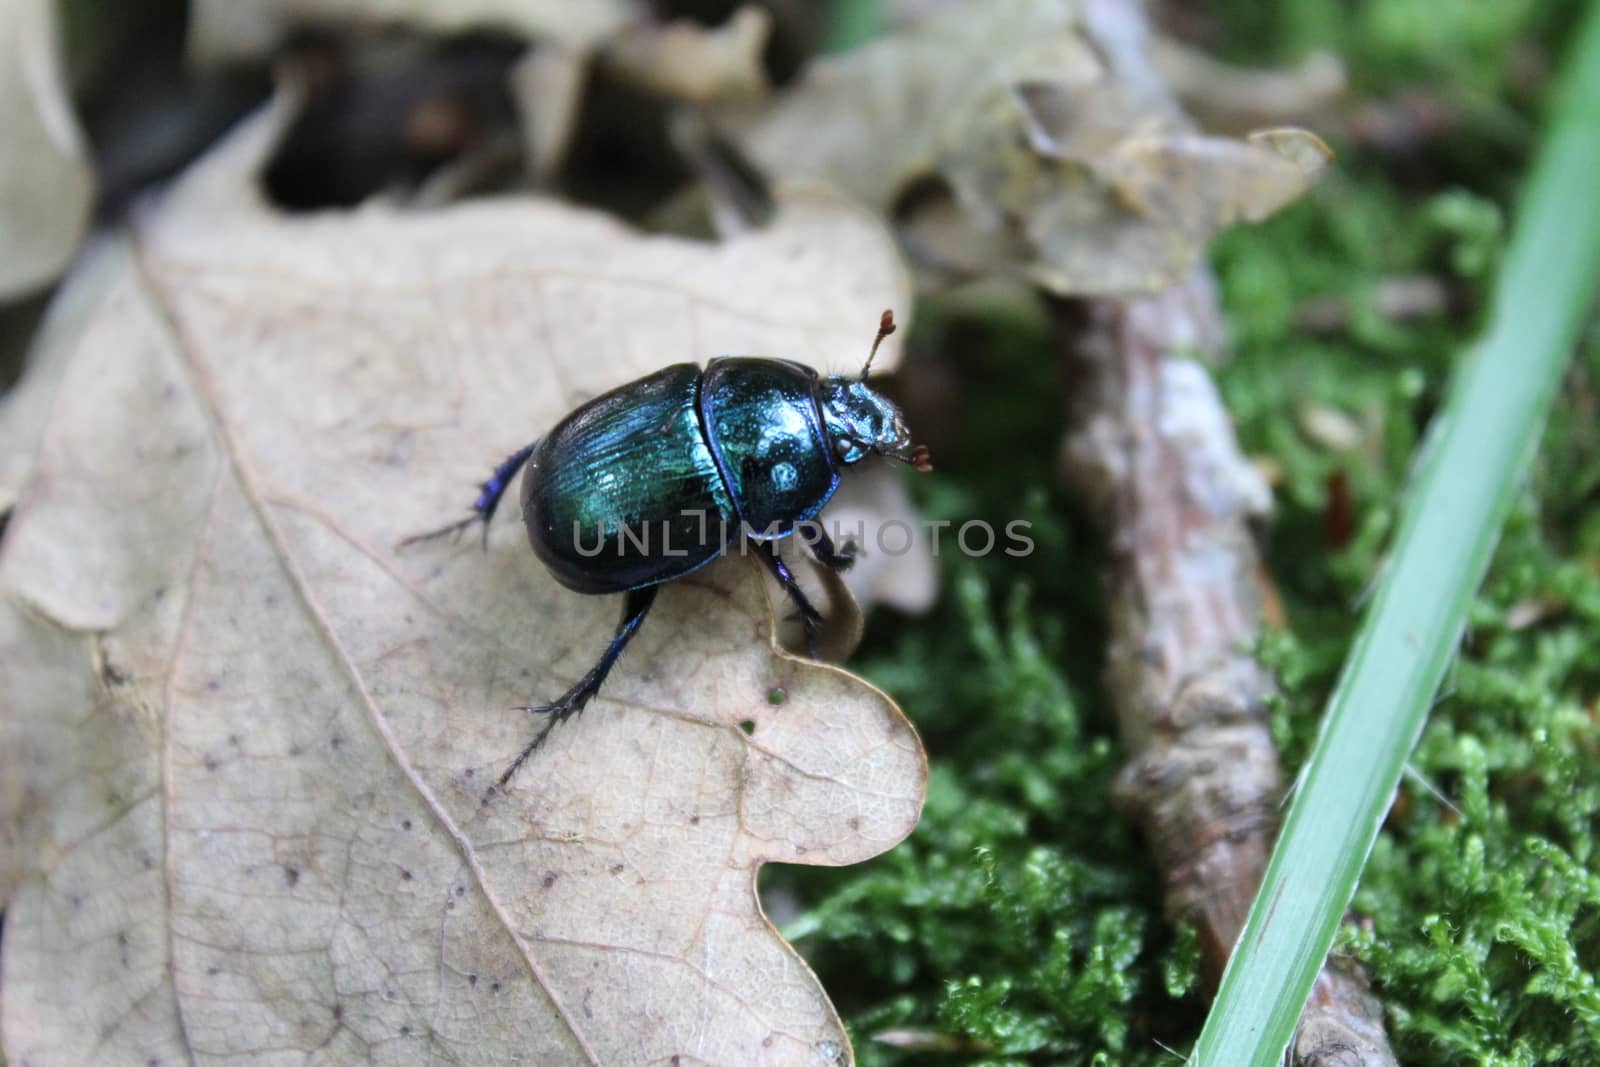 The picture shows a dung beetle in the forest.